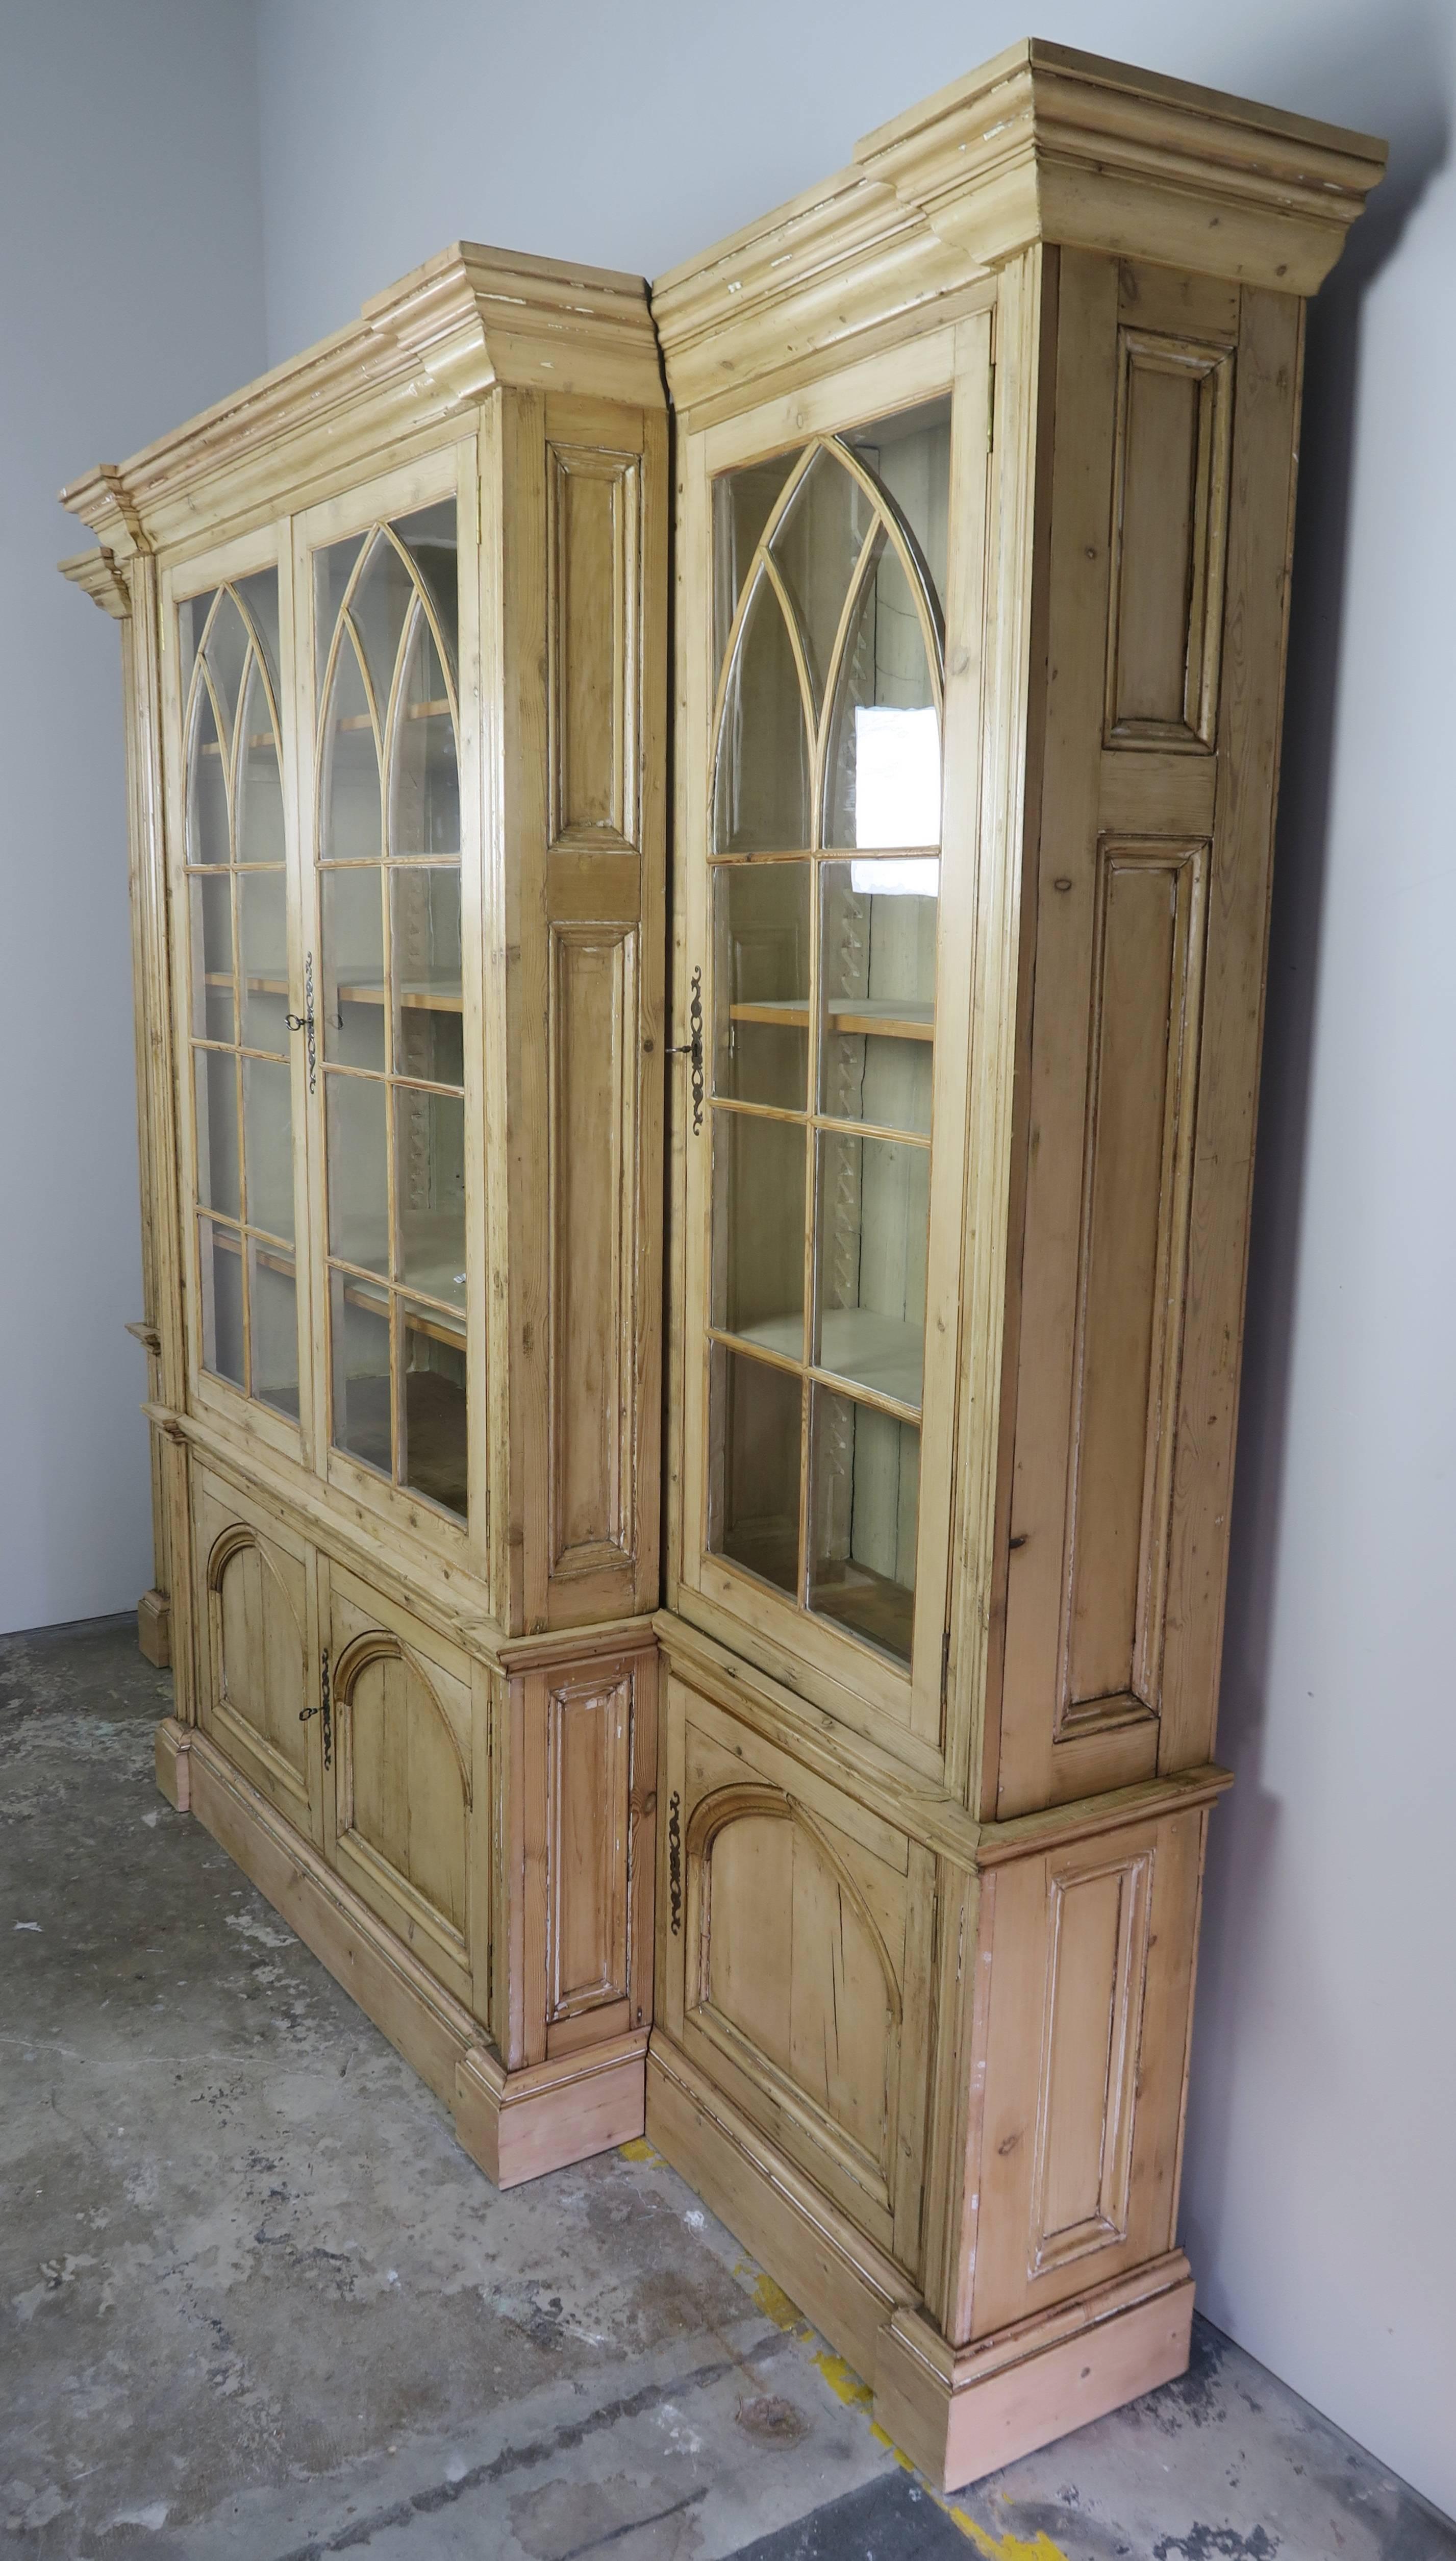 19th century English pine three part bookcase with original glass and natural wood finish.